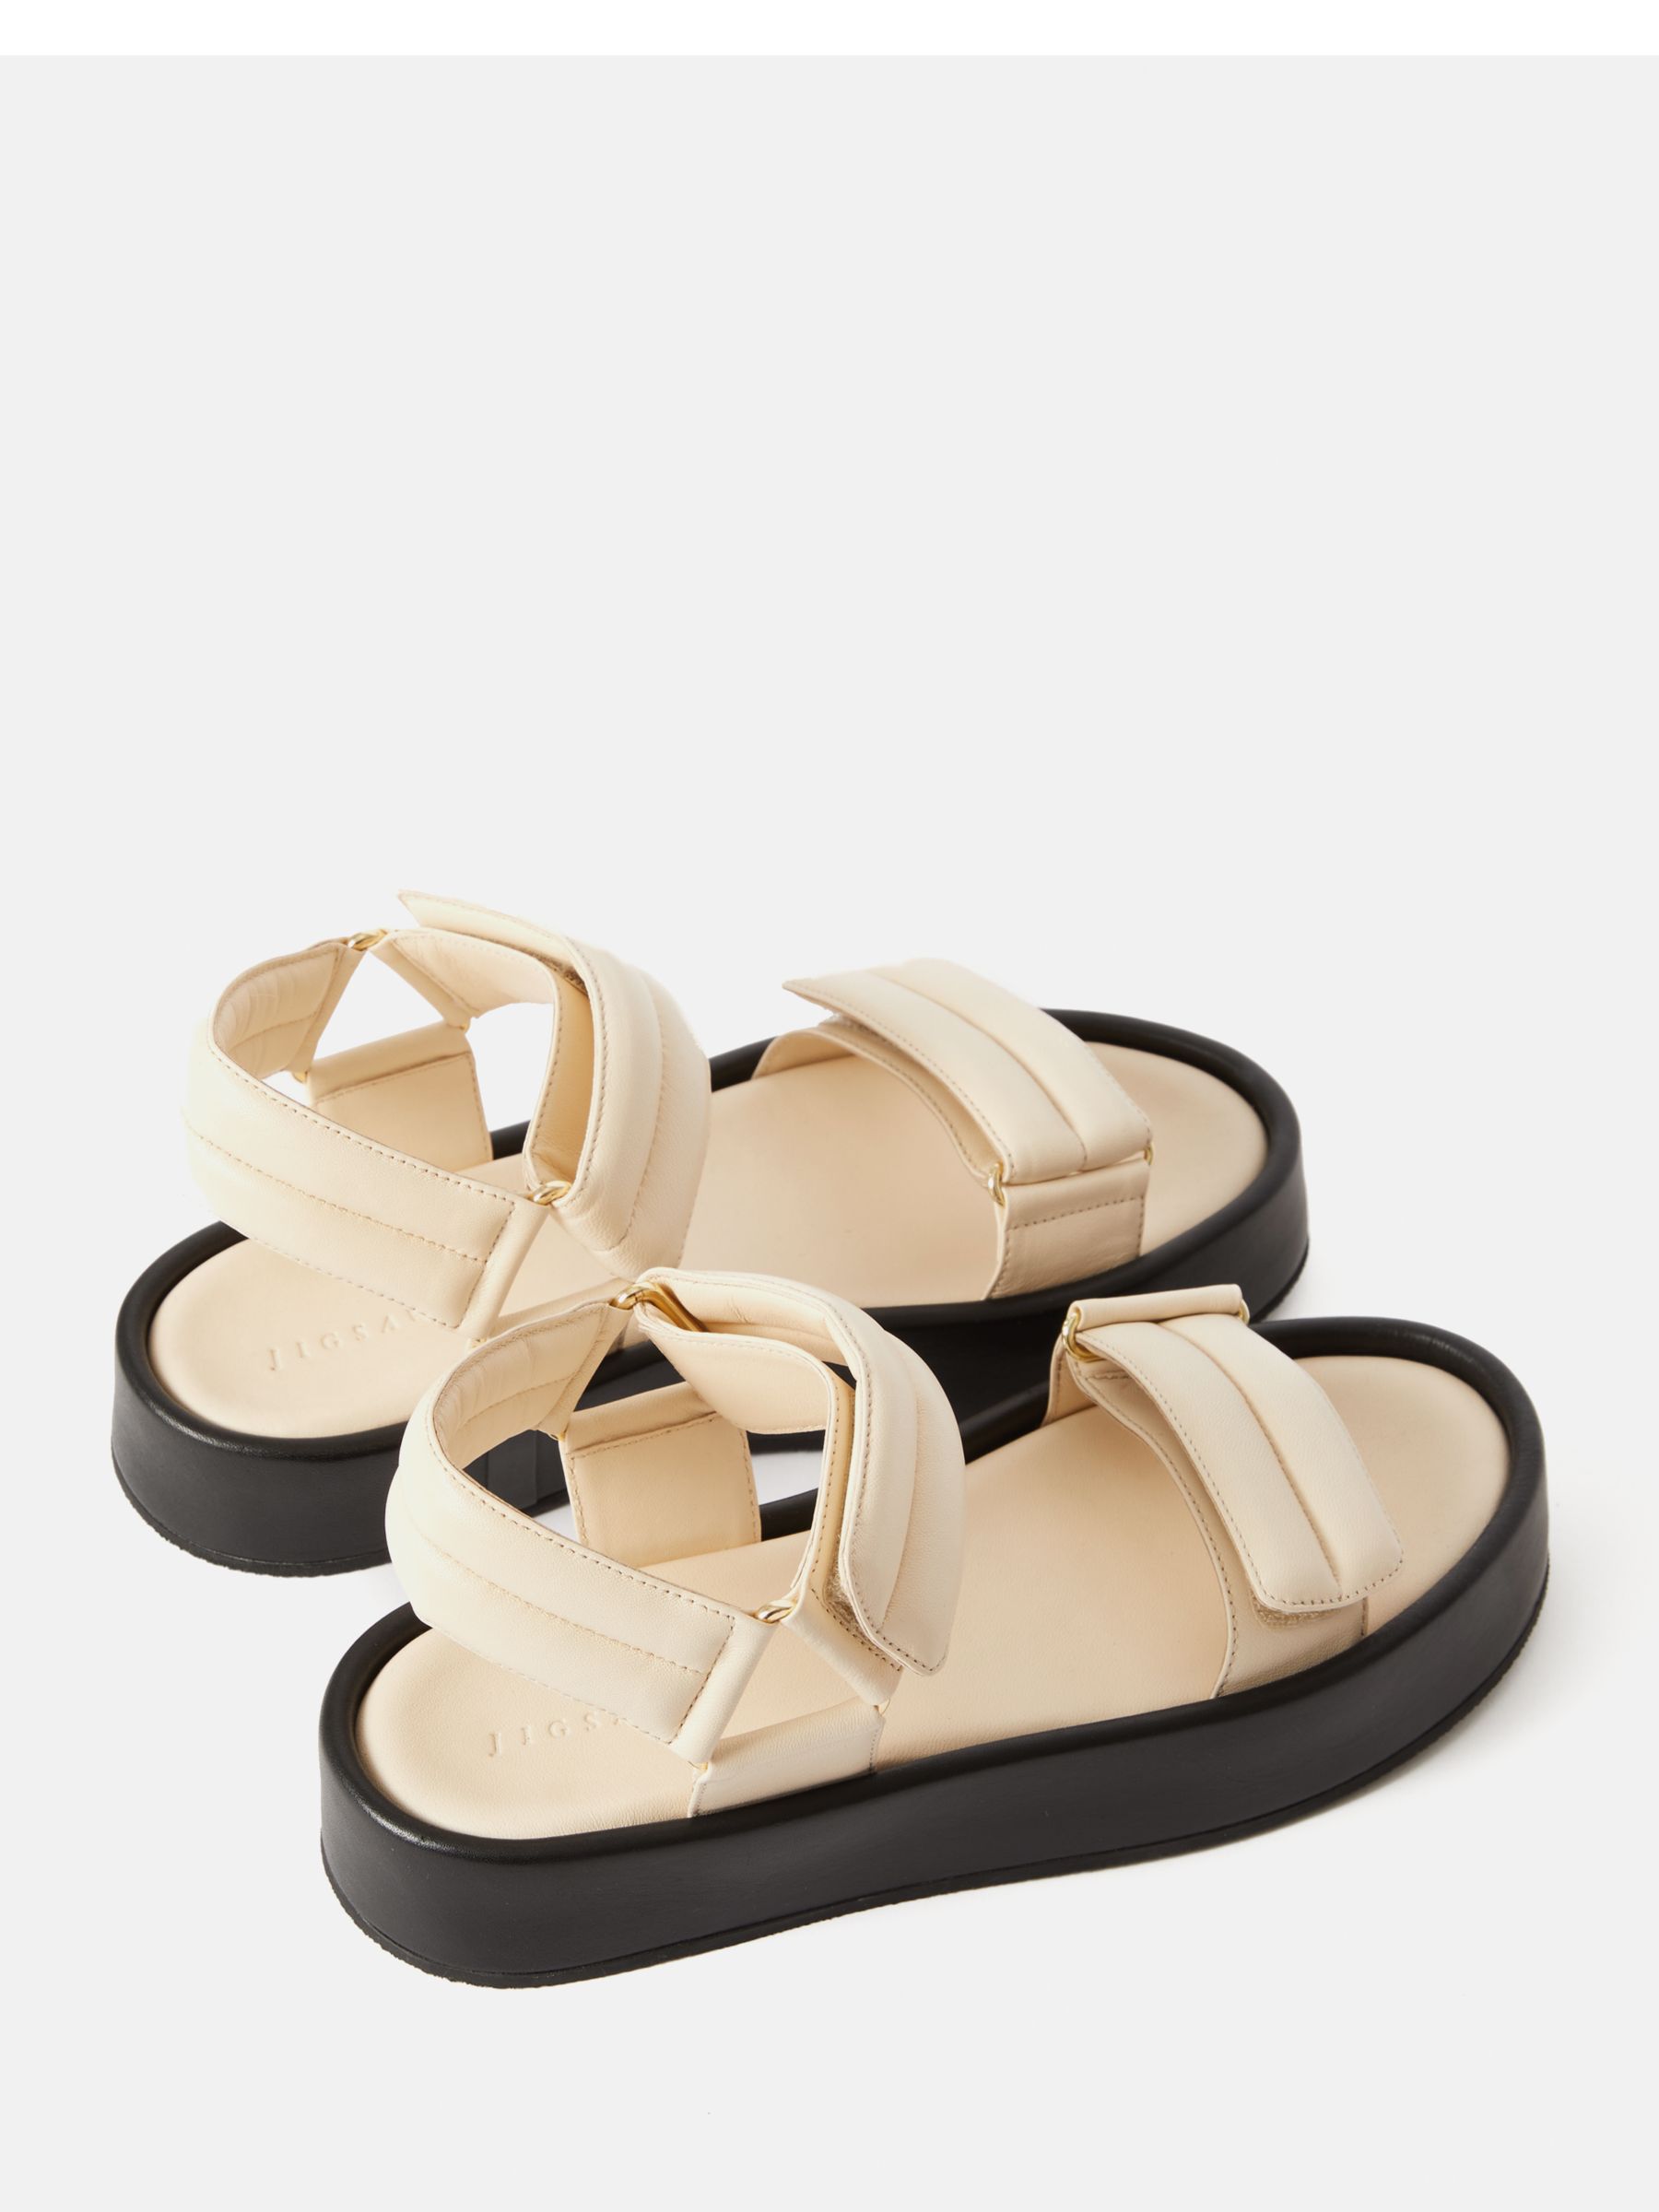 Jigsaw Raquel Leather Footbed Sandals, Cream at John Lewis & Partners